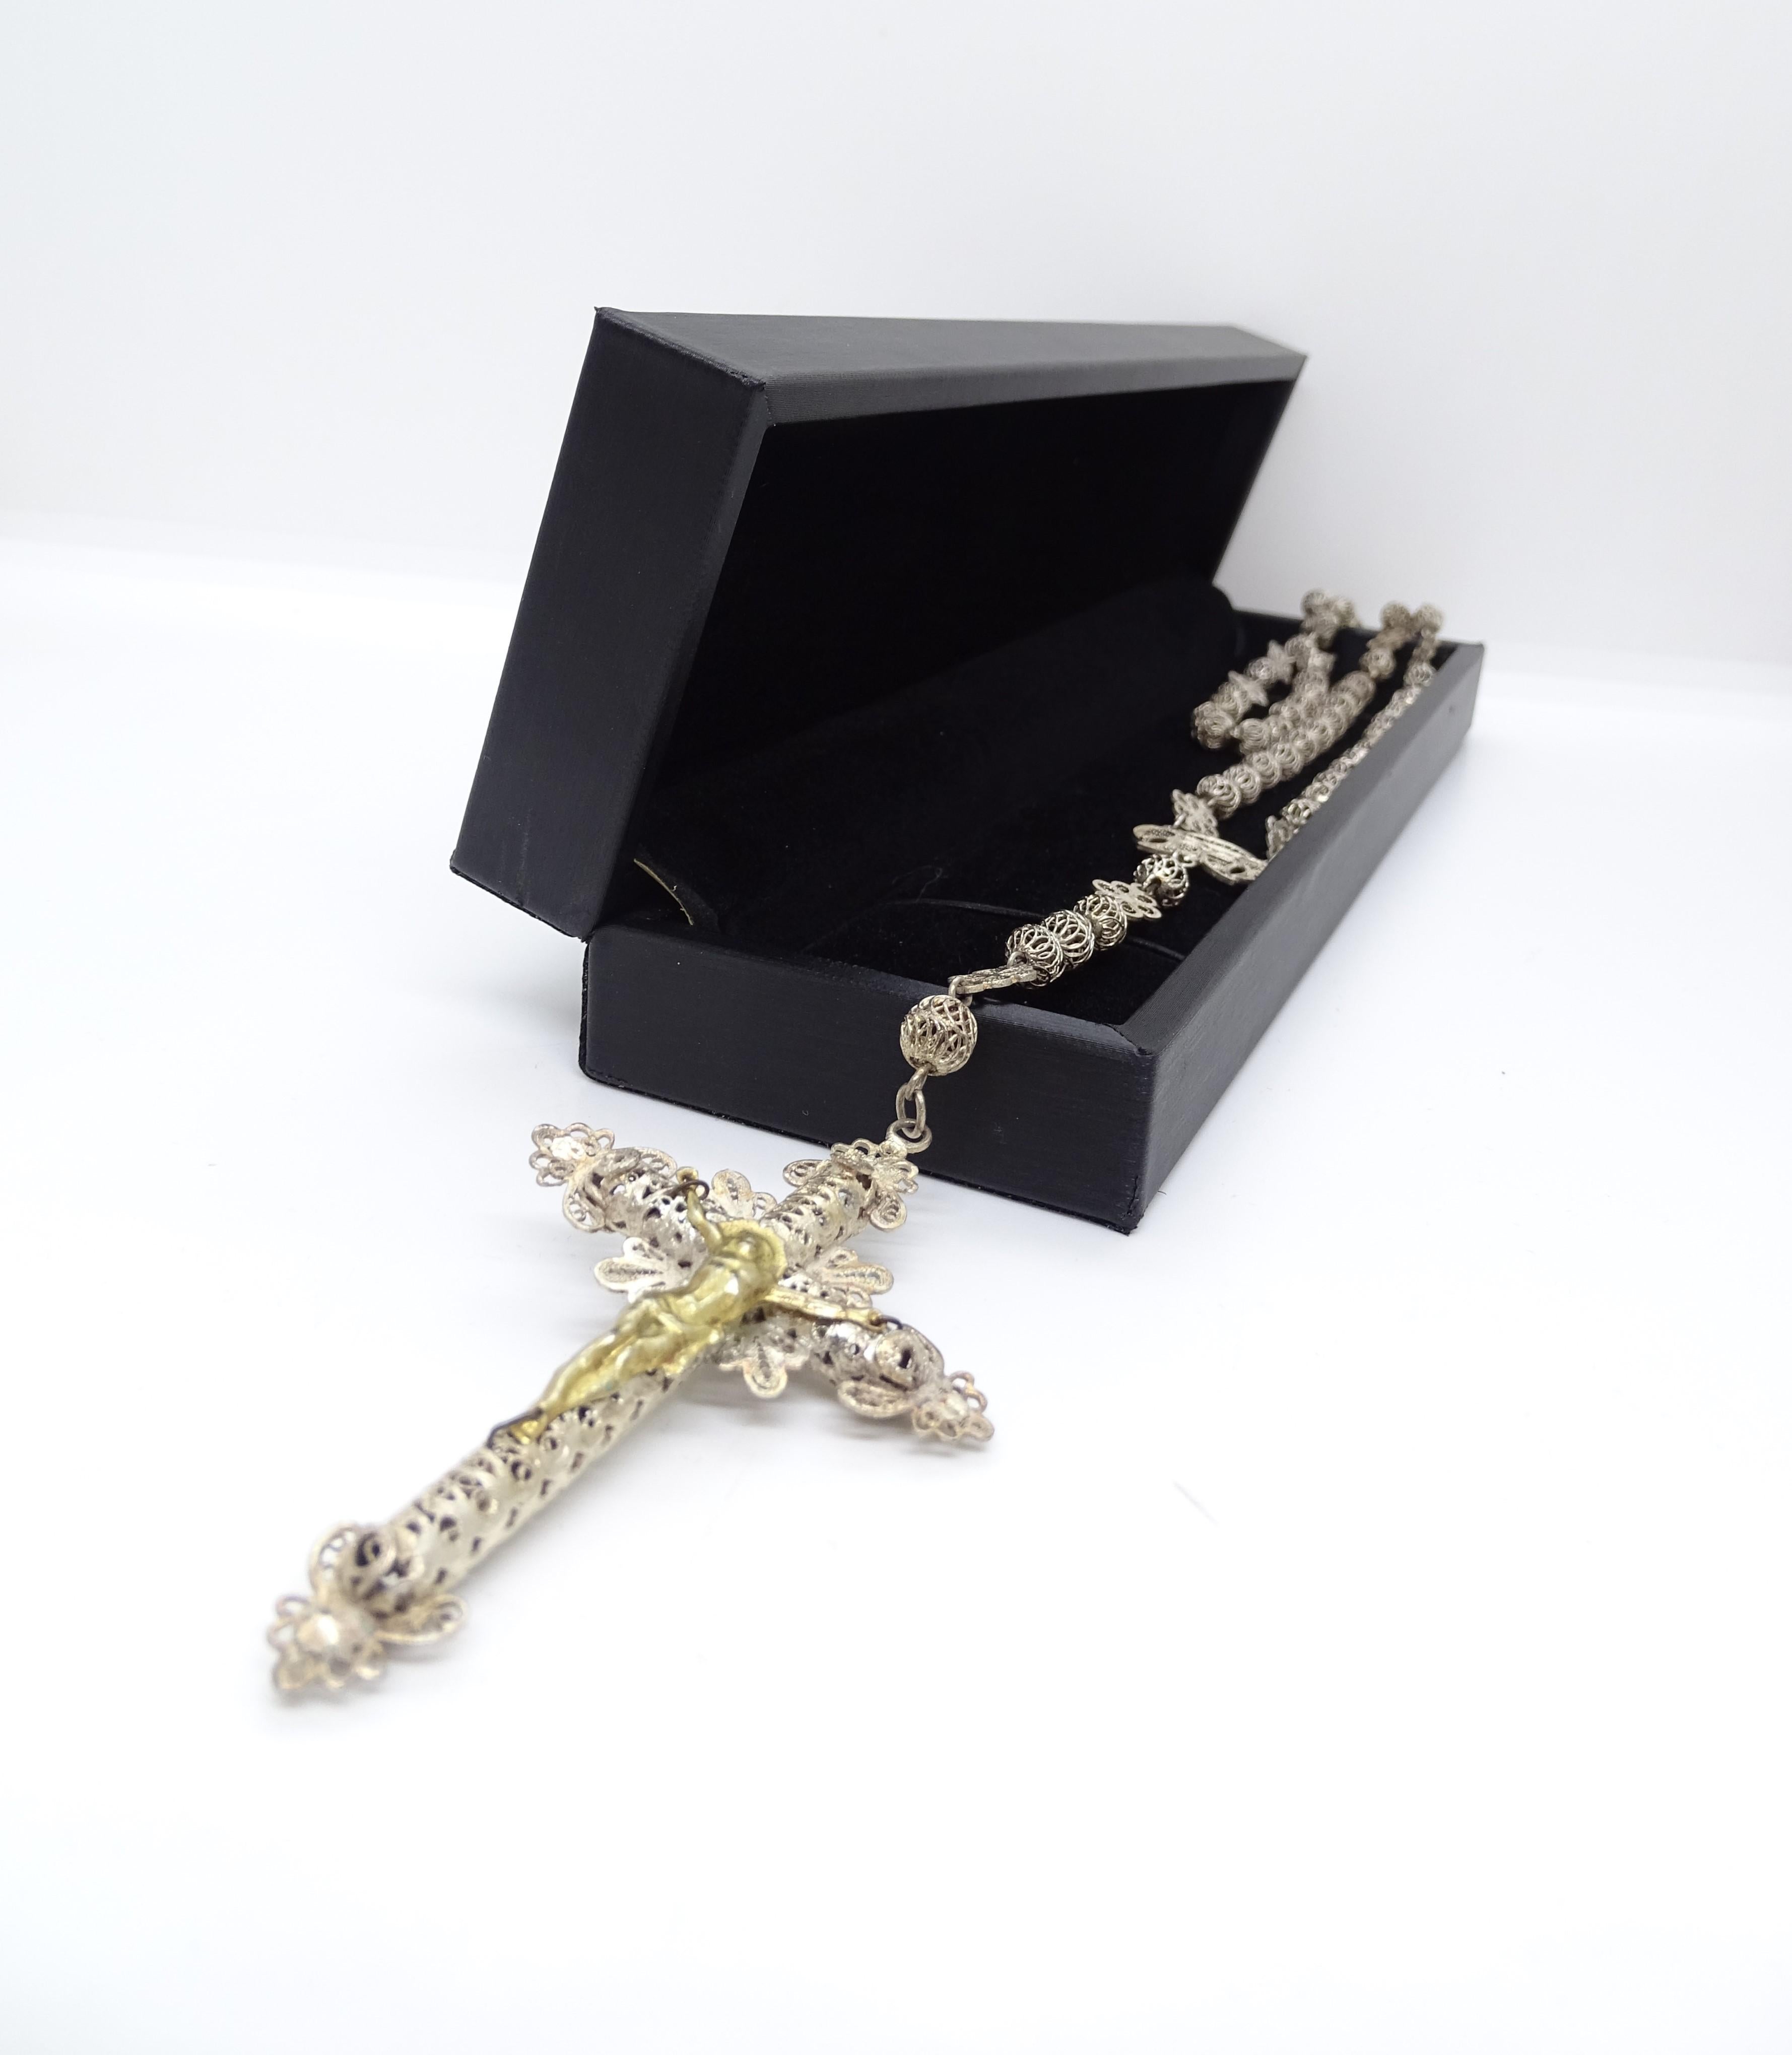 Spanish rosary in gold-plated silver filigree gilded silver cross 16